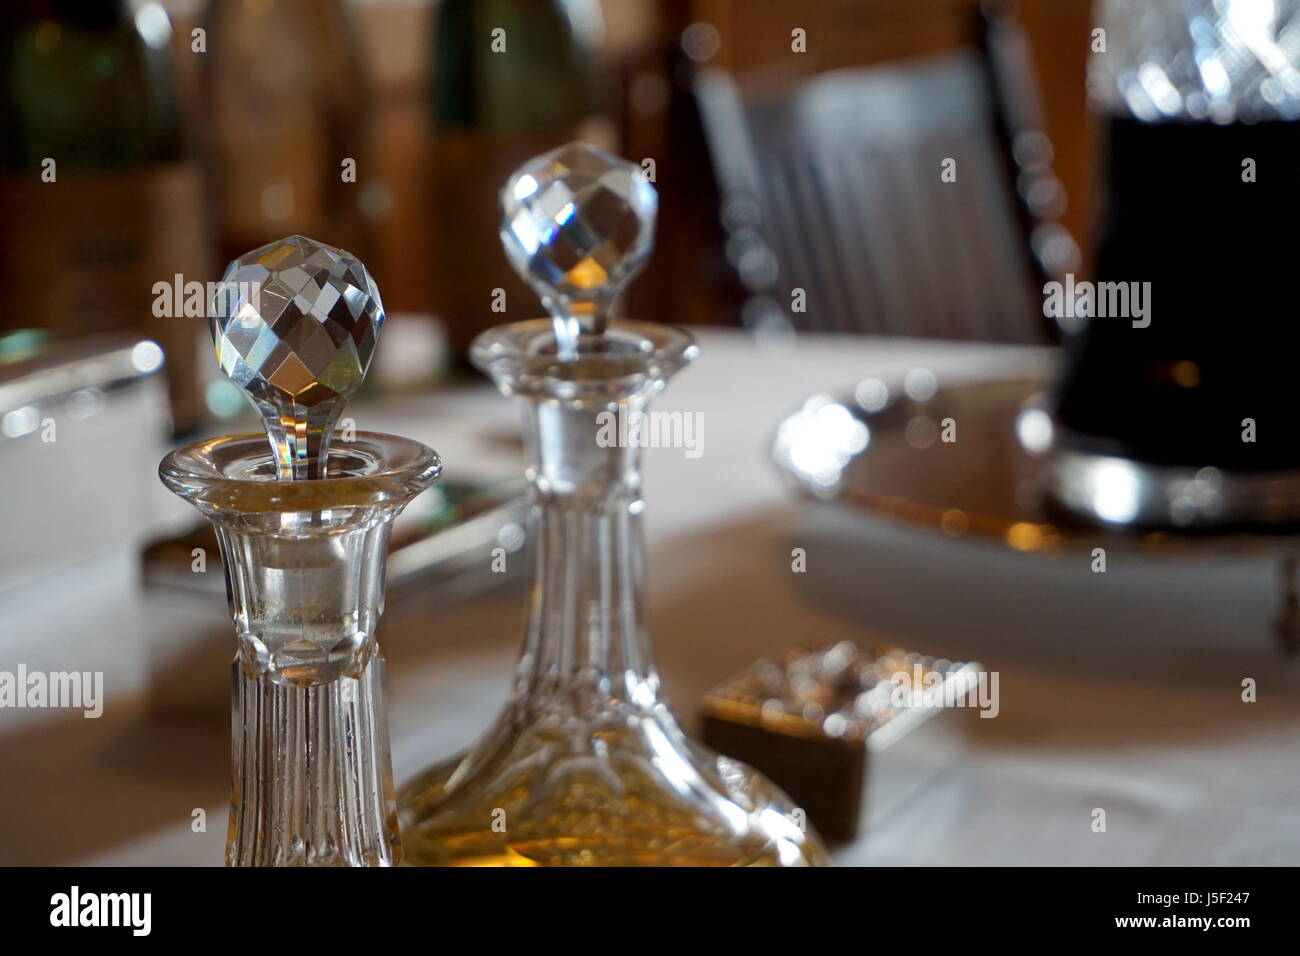 Old glass wine and spirit decanters on an ornate table in natural daylight Stock Photo